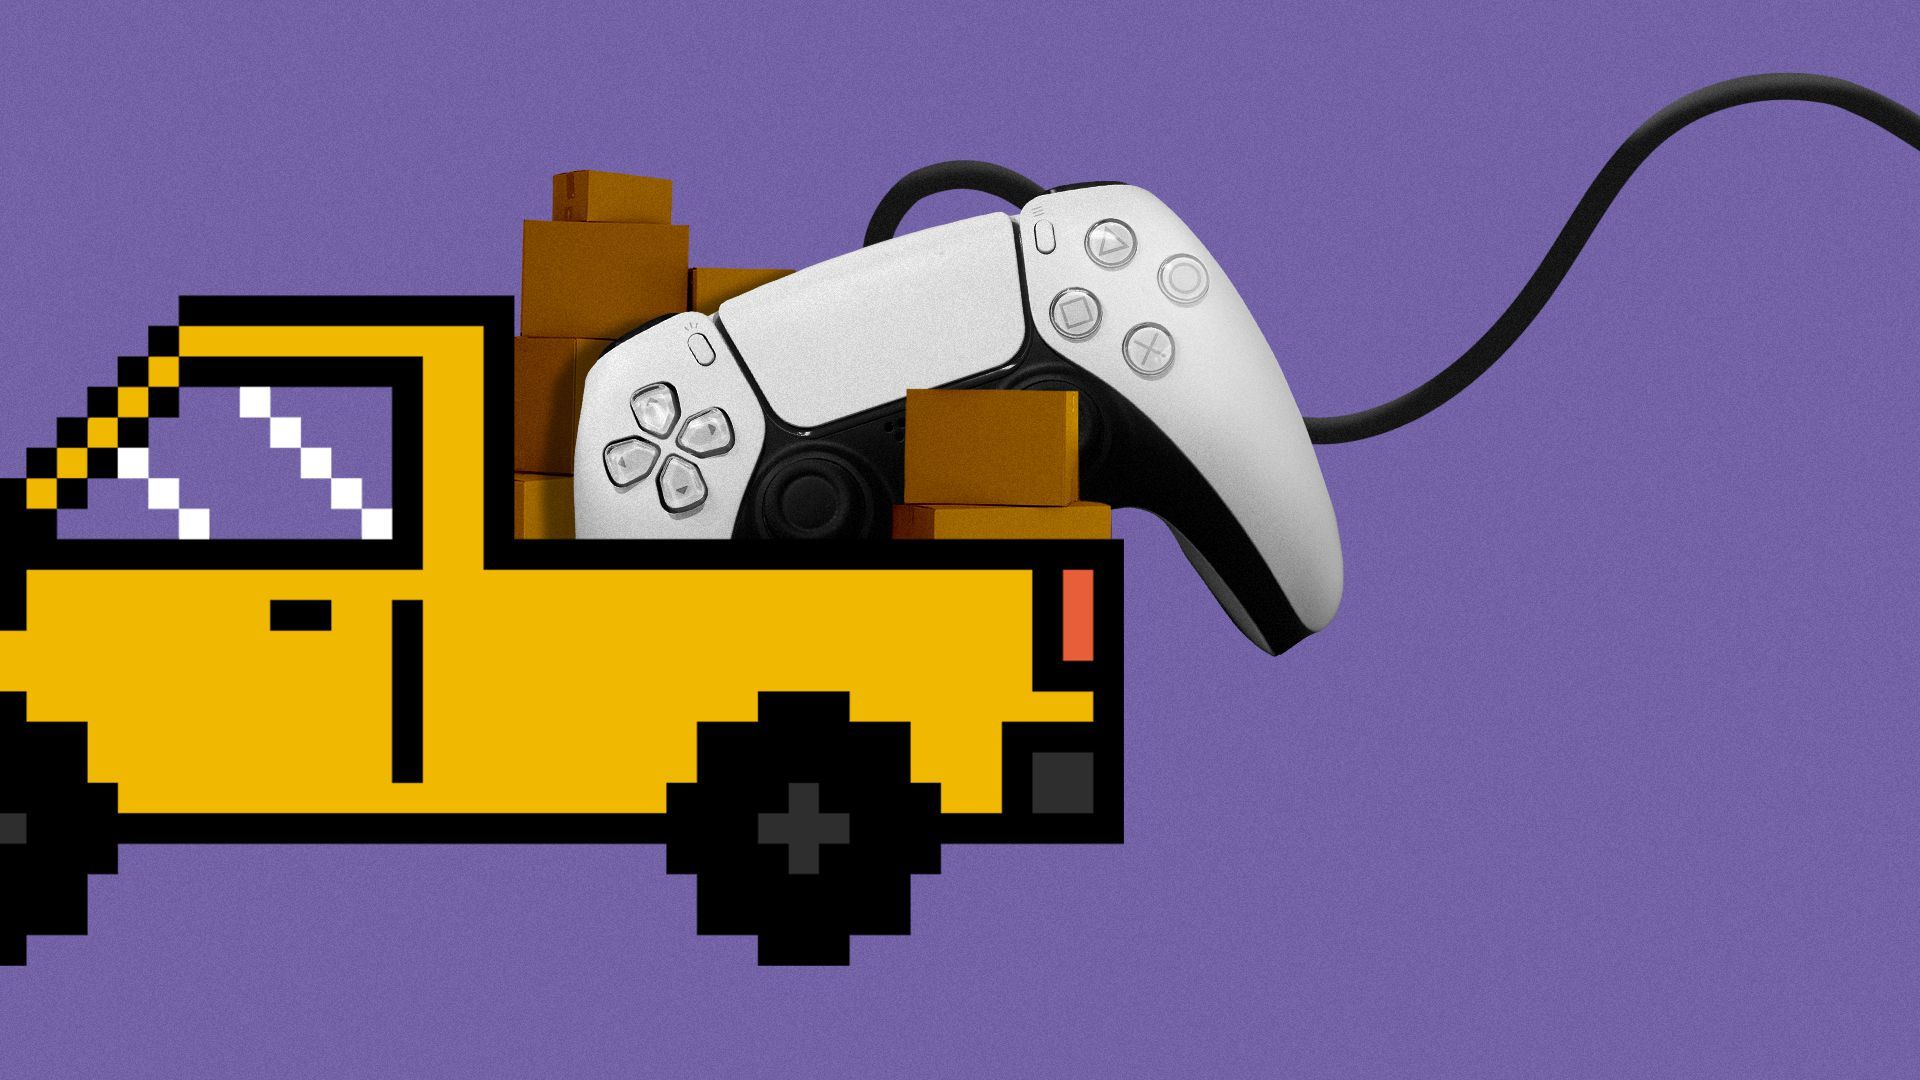 Illustration of a PS5 controller and moving boxes in the bed of a pixellated truck.